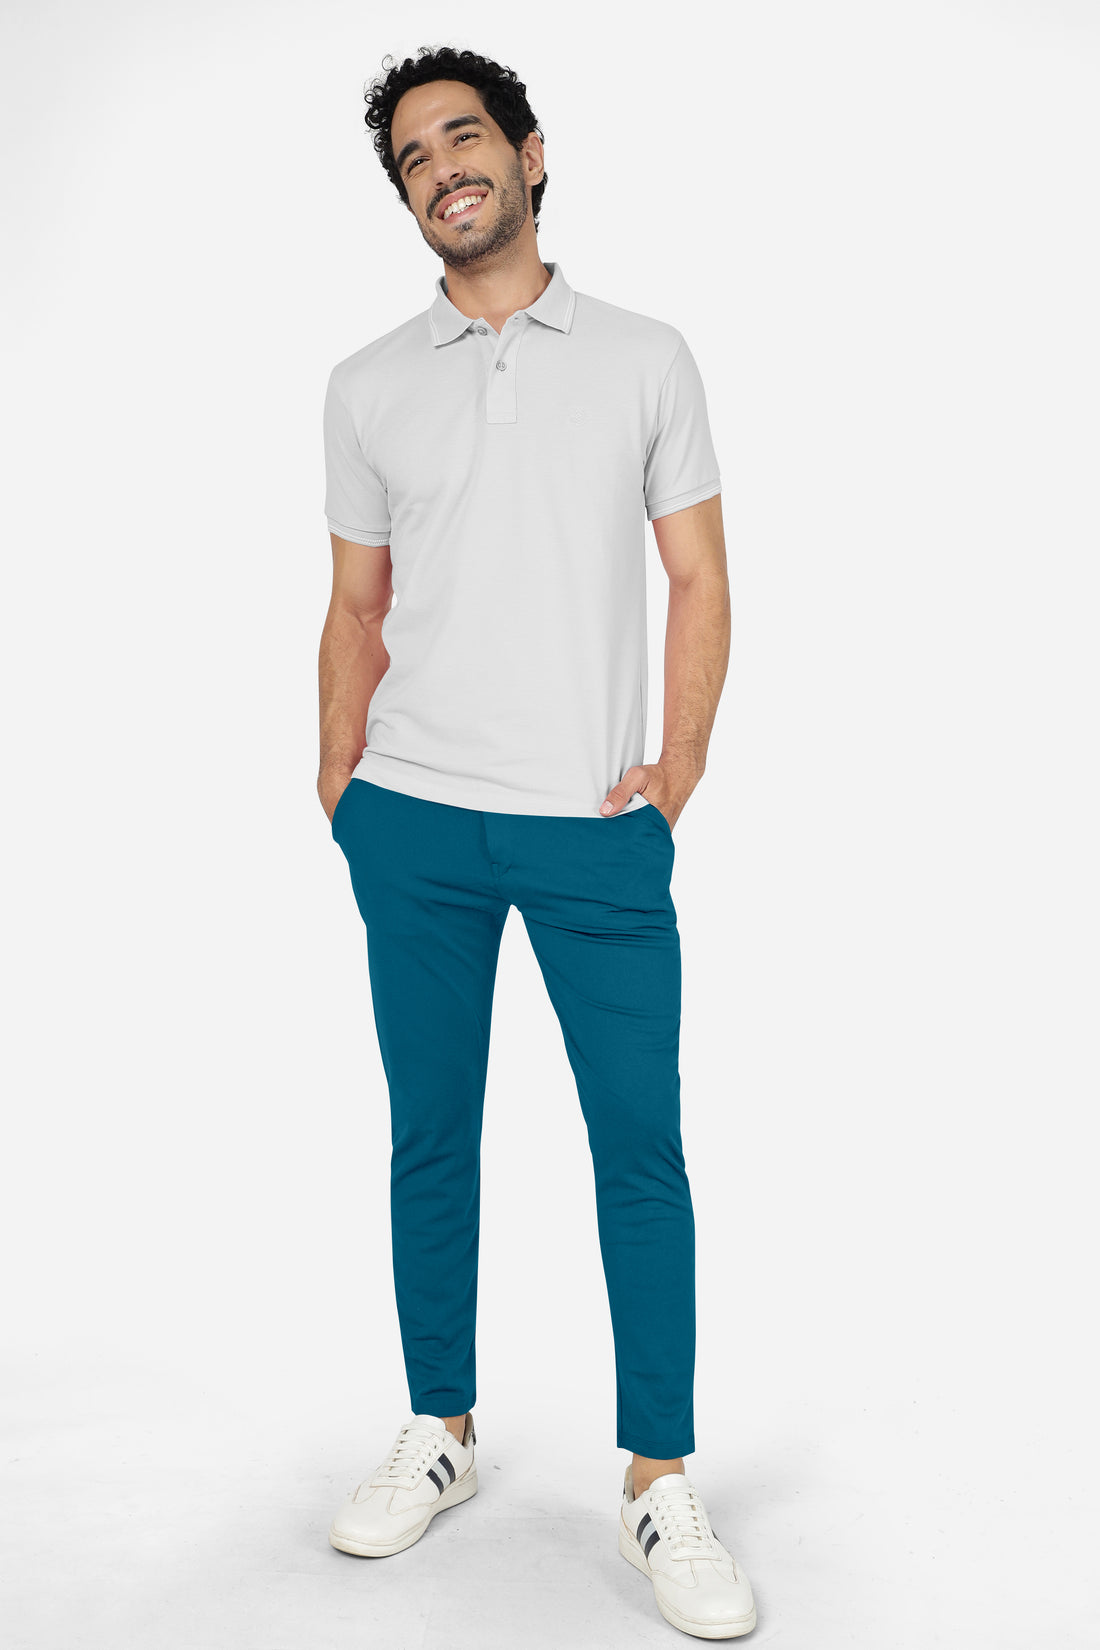 Formal Stretchable Teal Blue Pant with Expandable Waist for Men. Regular Fit, Flat Front, Premium Lycra Fabric Pants for Office, Party and Casual Wear